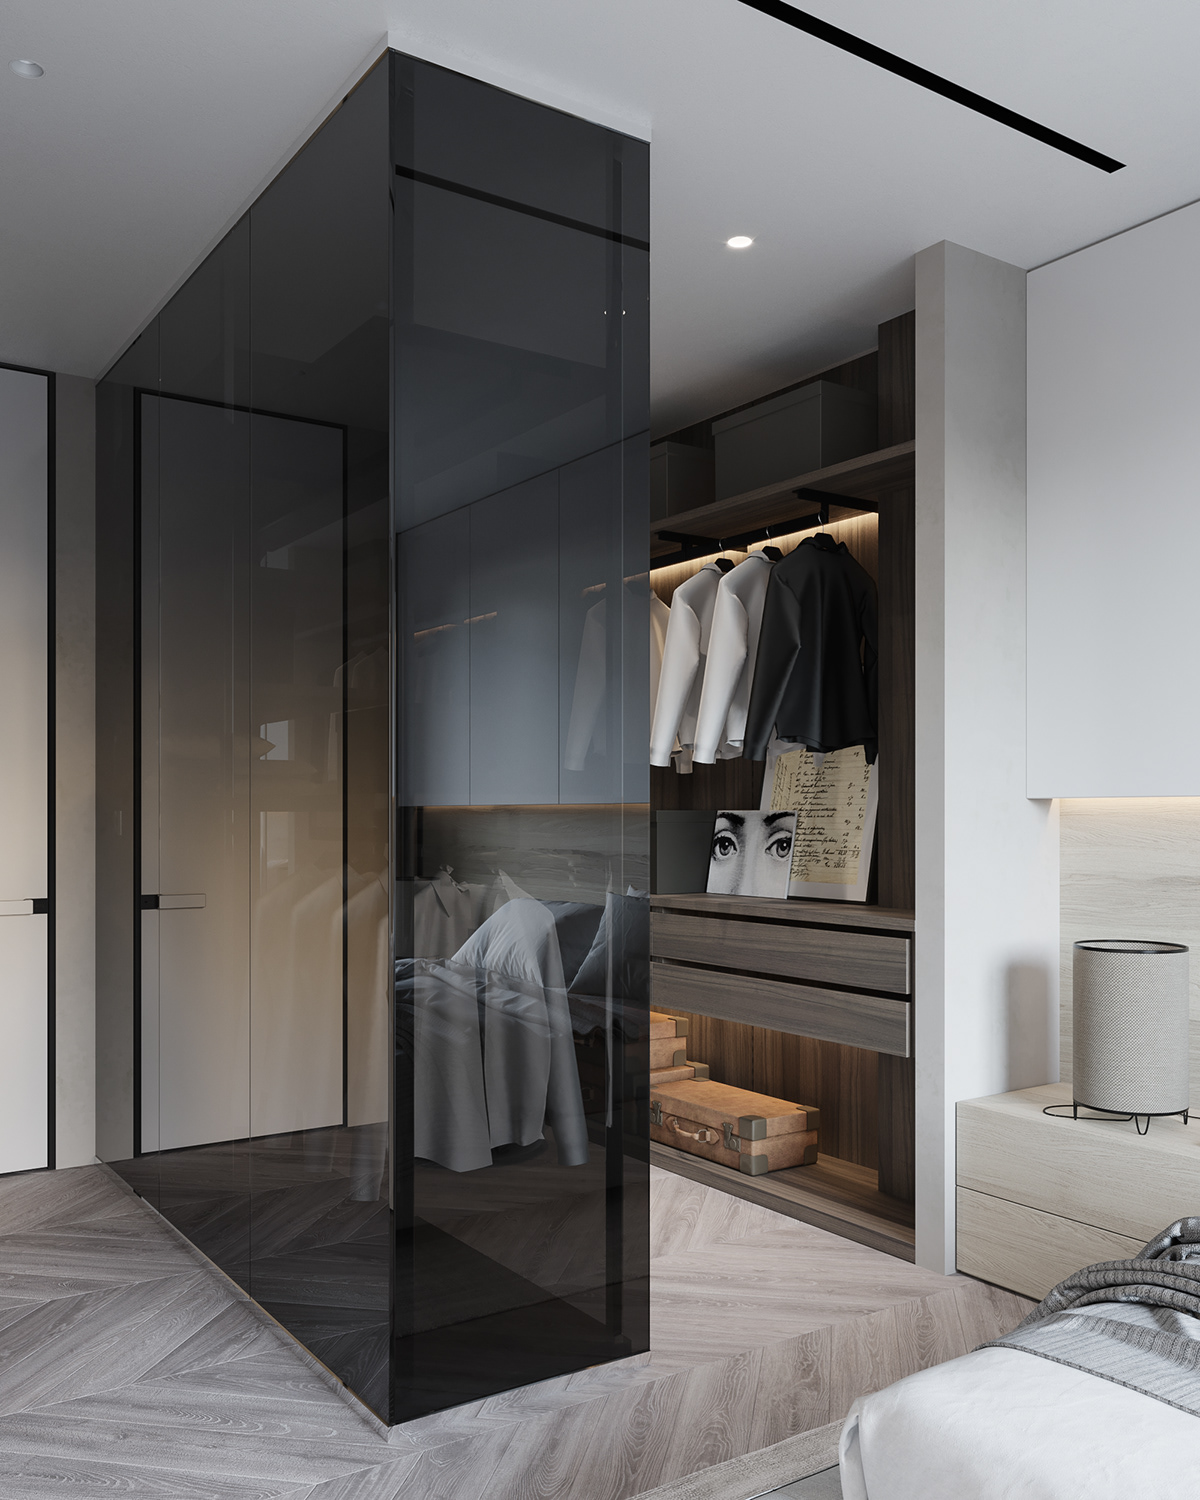 The wardrobe and changing areas are separated by a large glass wall, contributing to expanding the space view.